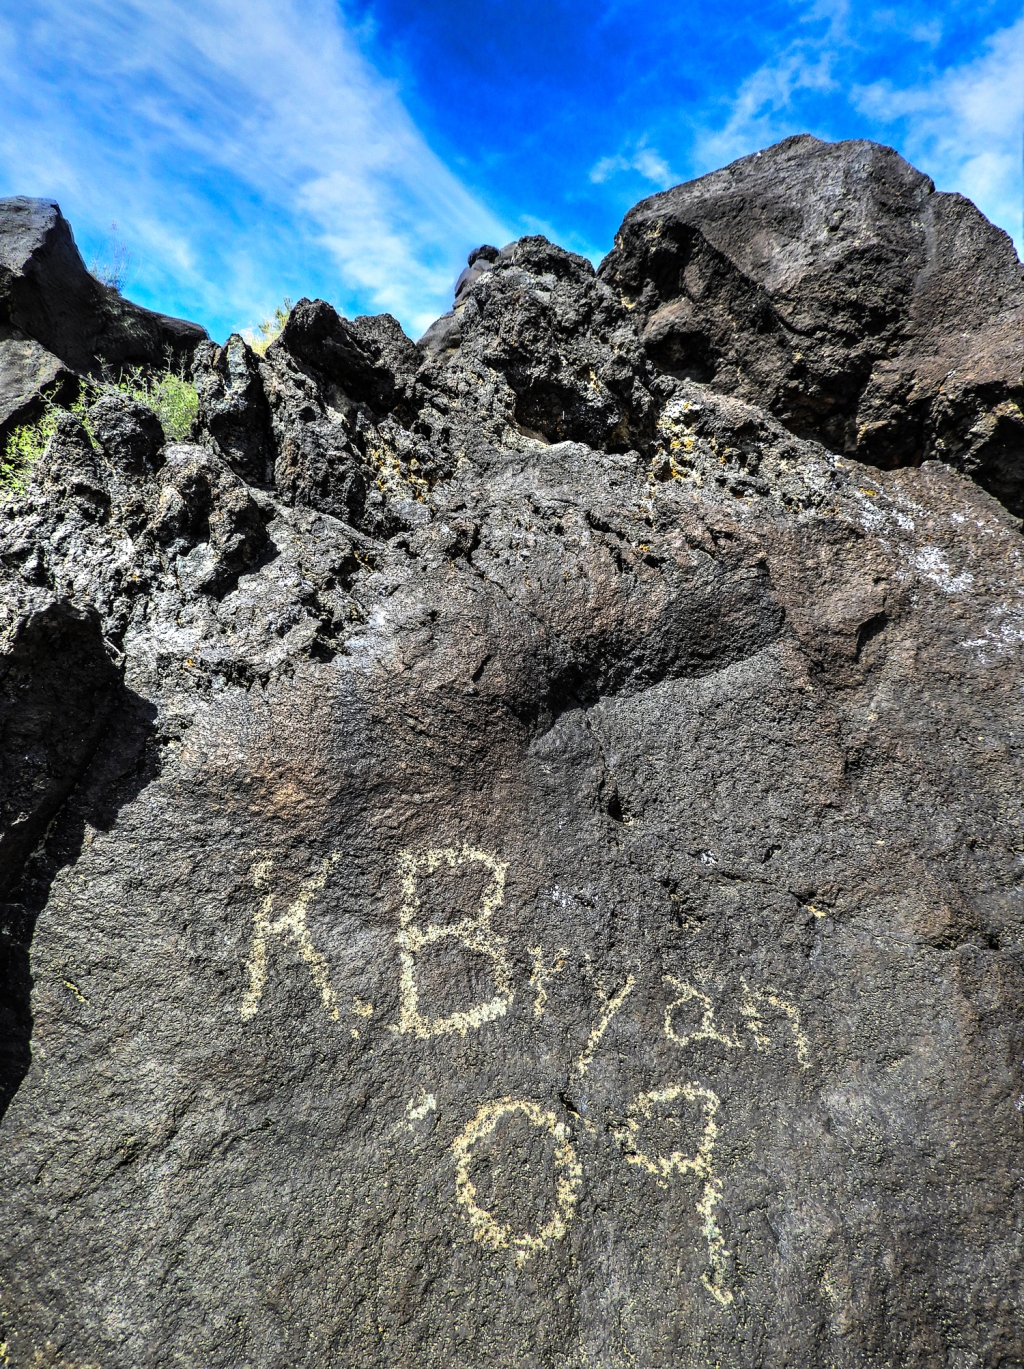 Kirk Bryan, A Geologist Whose Name is Forever Sketched in Stone